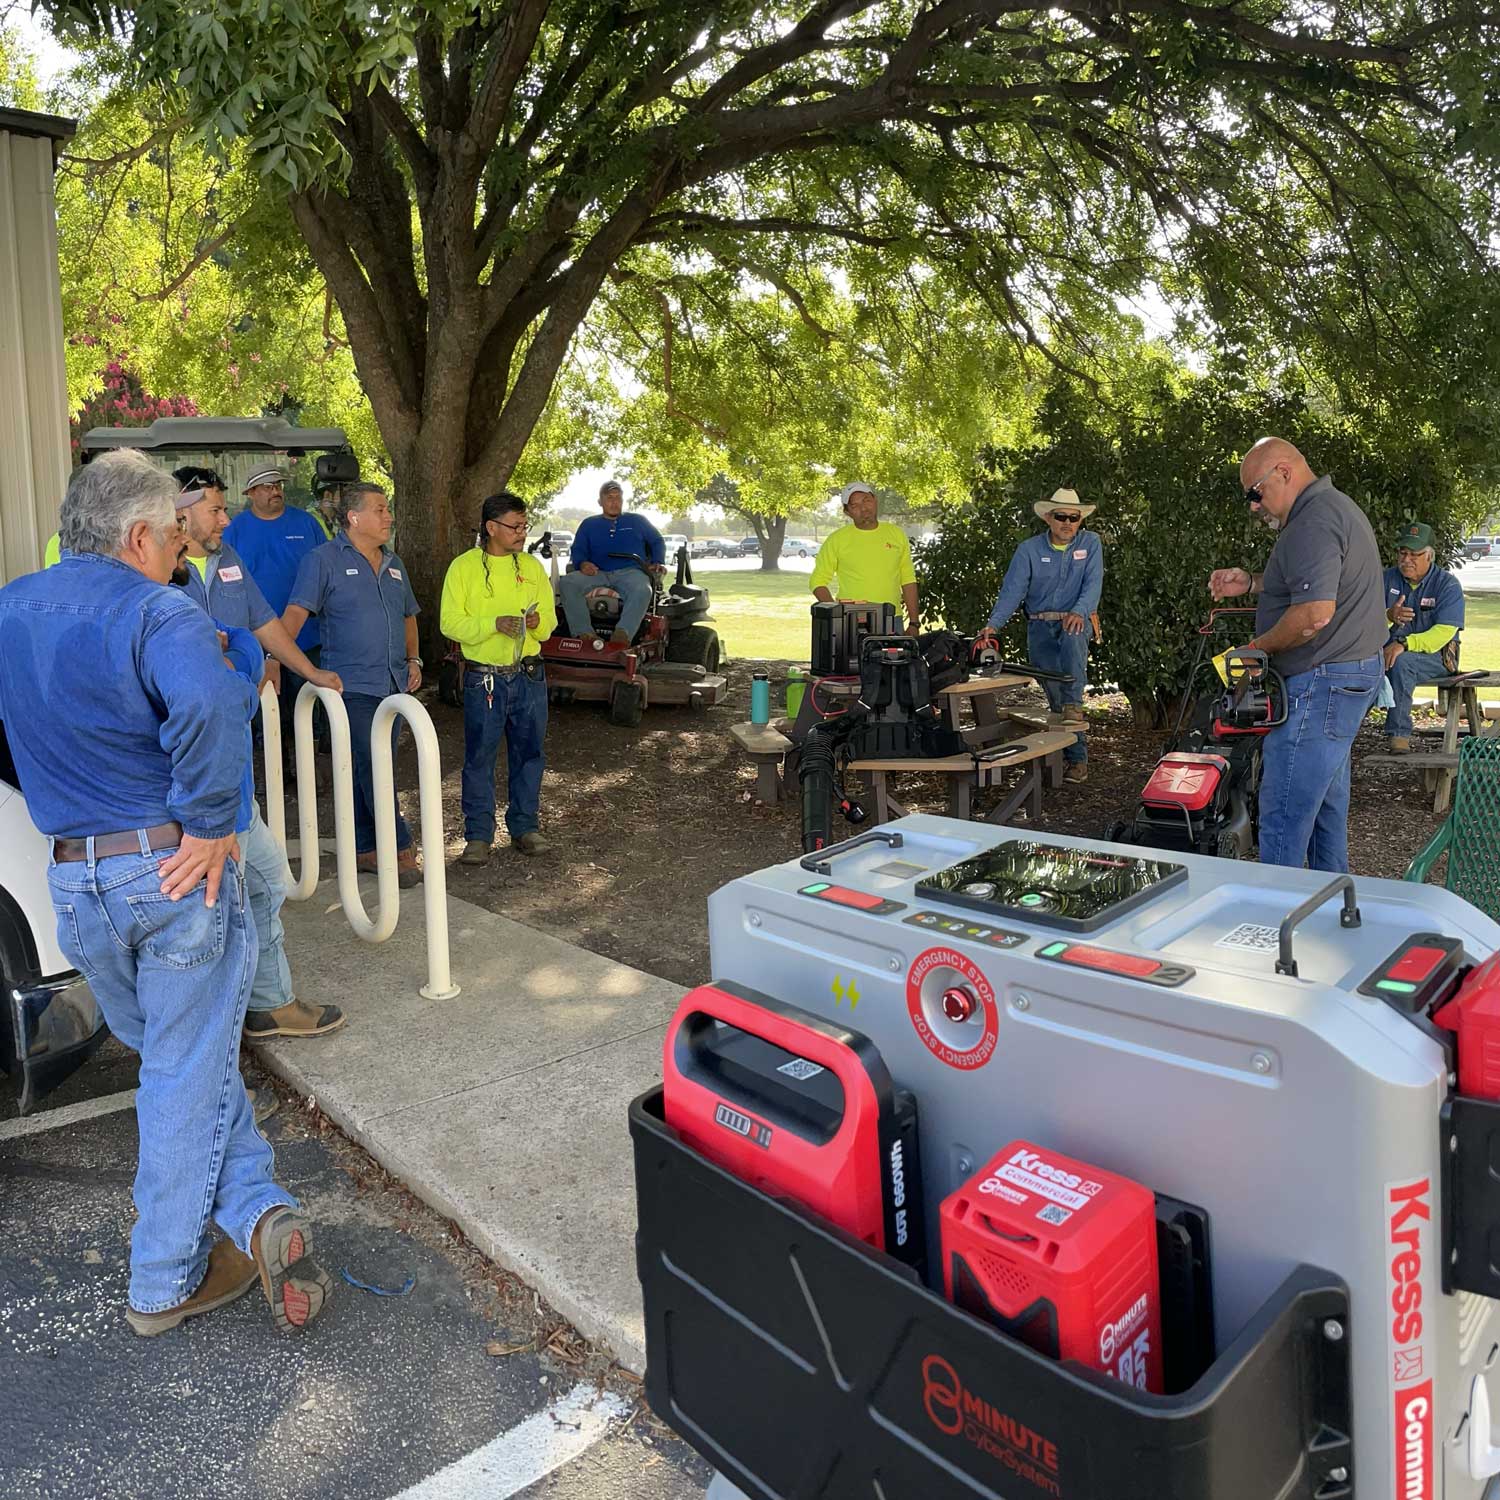 A group of men gather under a tree to examine a variety of electric gardening tools laid out across a table.